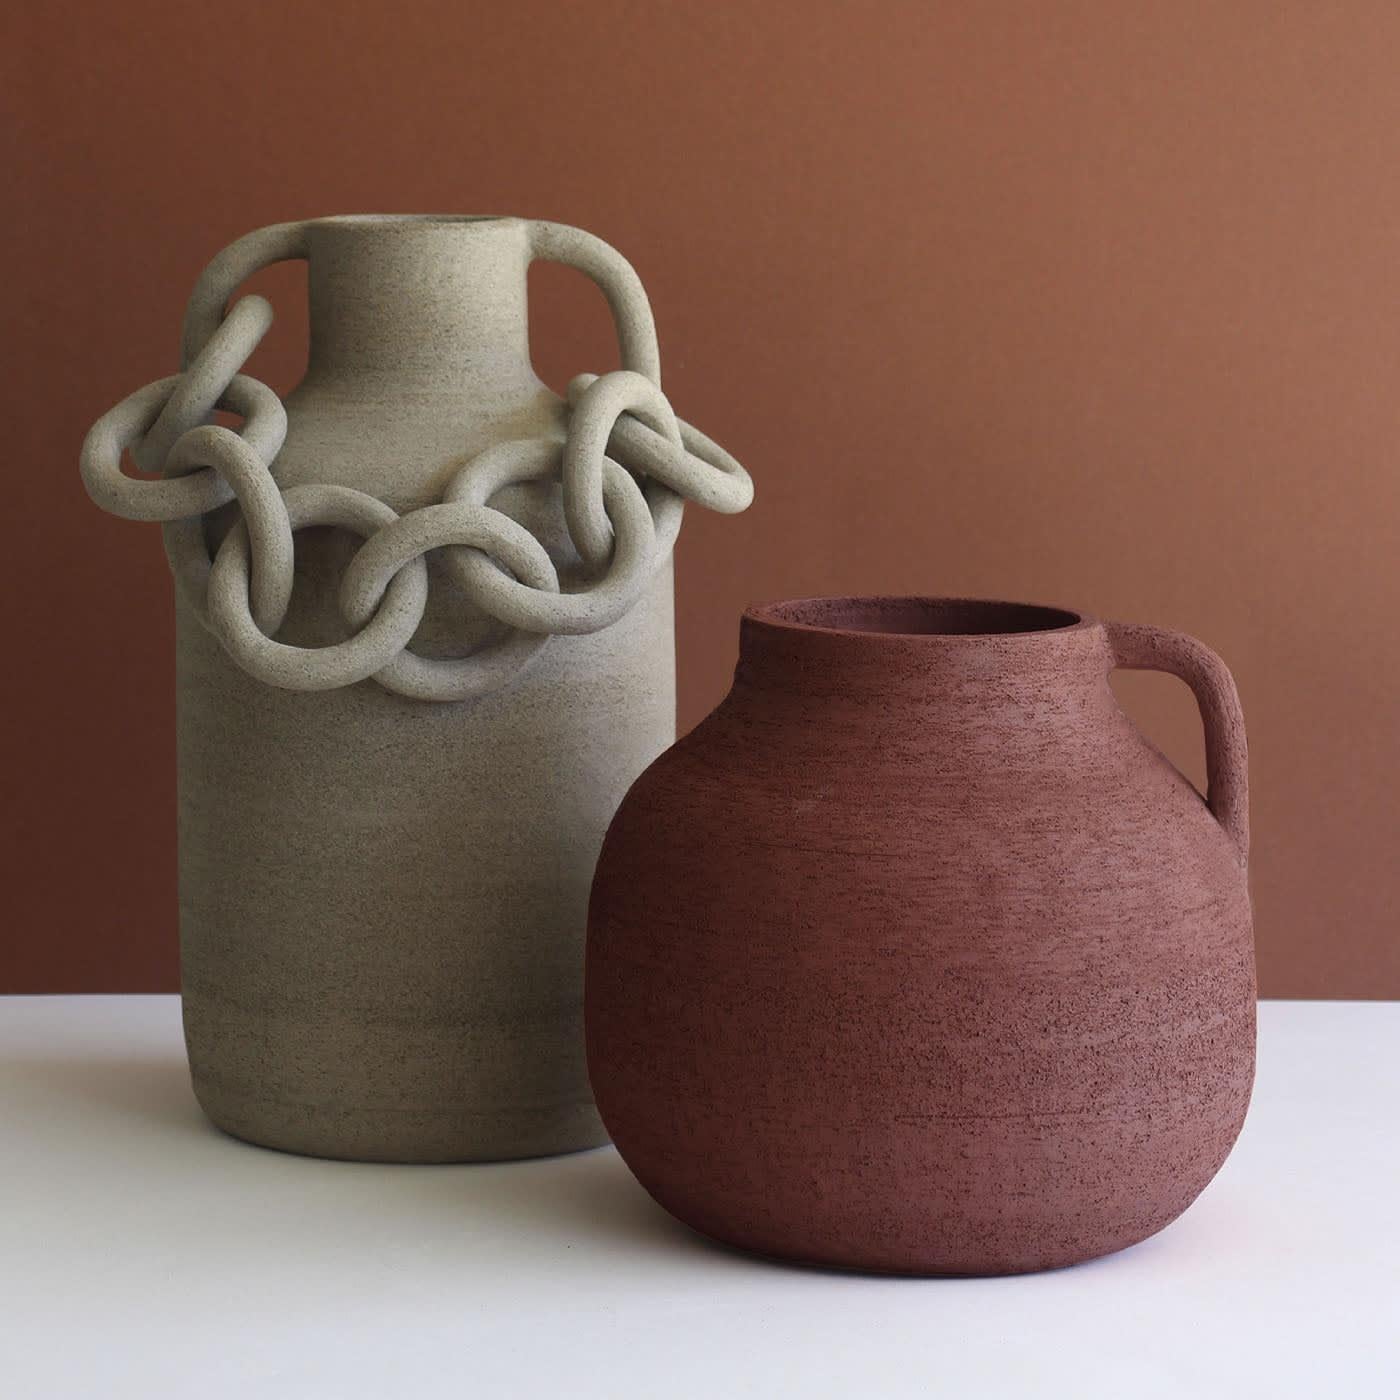 Rings gathered in a chain adorn this precious artisan amphora, a decorative piece fashioned of stoneware and here offered in a sophisticated scratched sand-toned look. The patient and careful manual crafting process ensures the absolute uniqueness